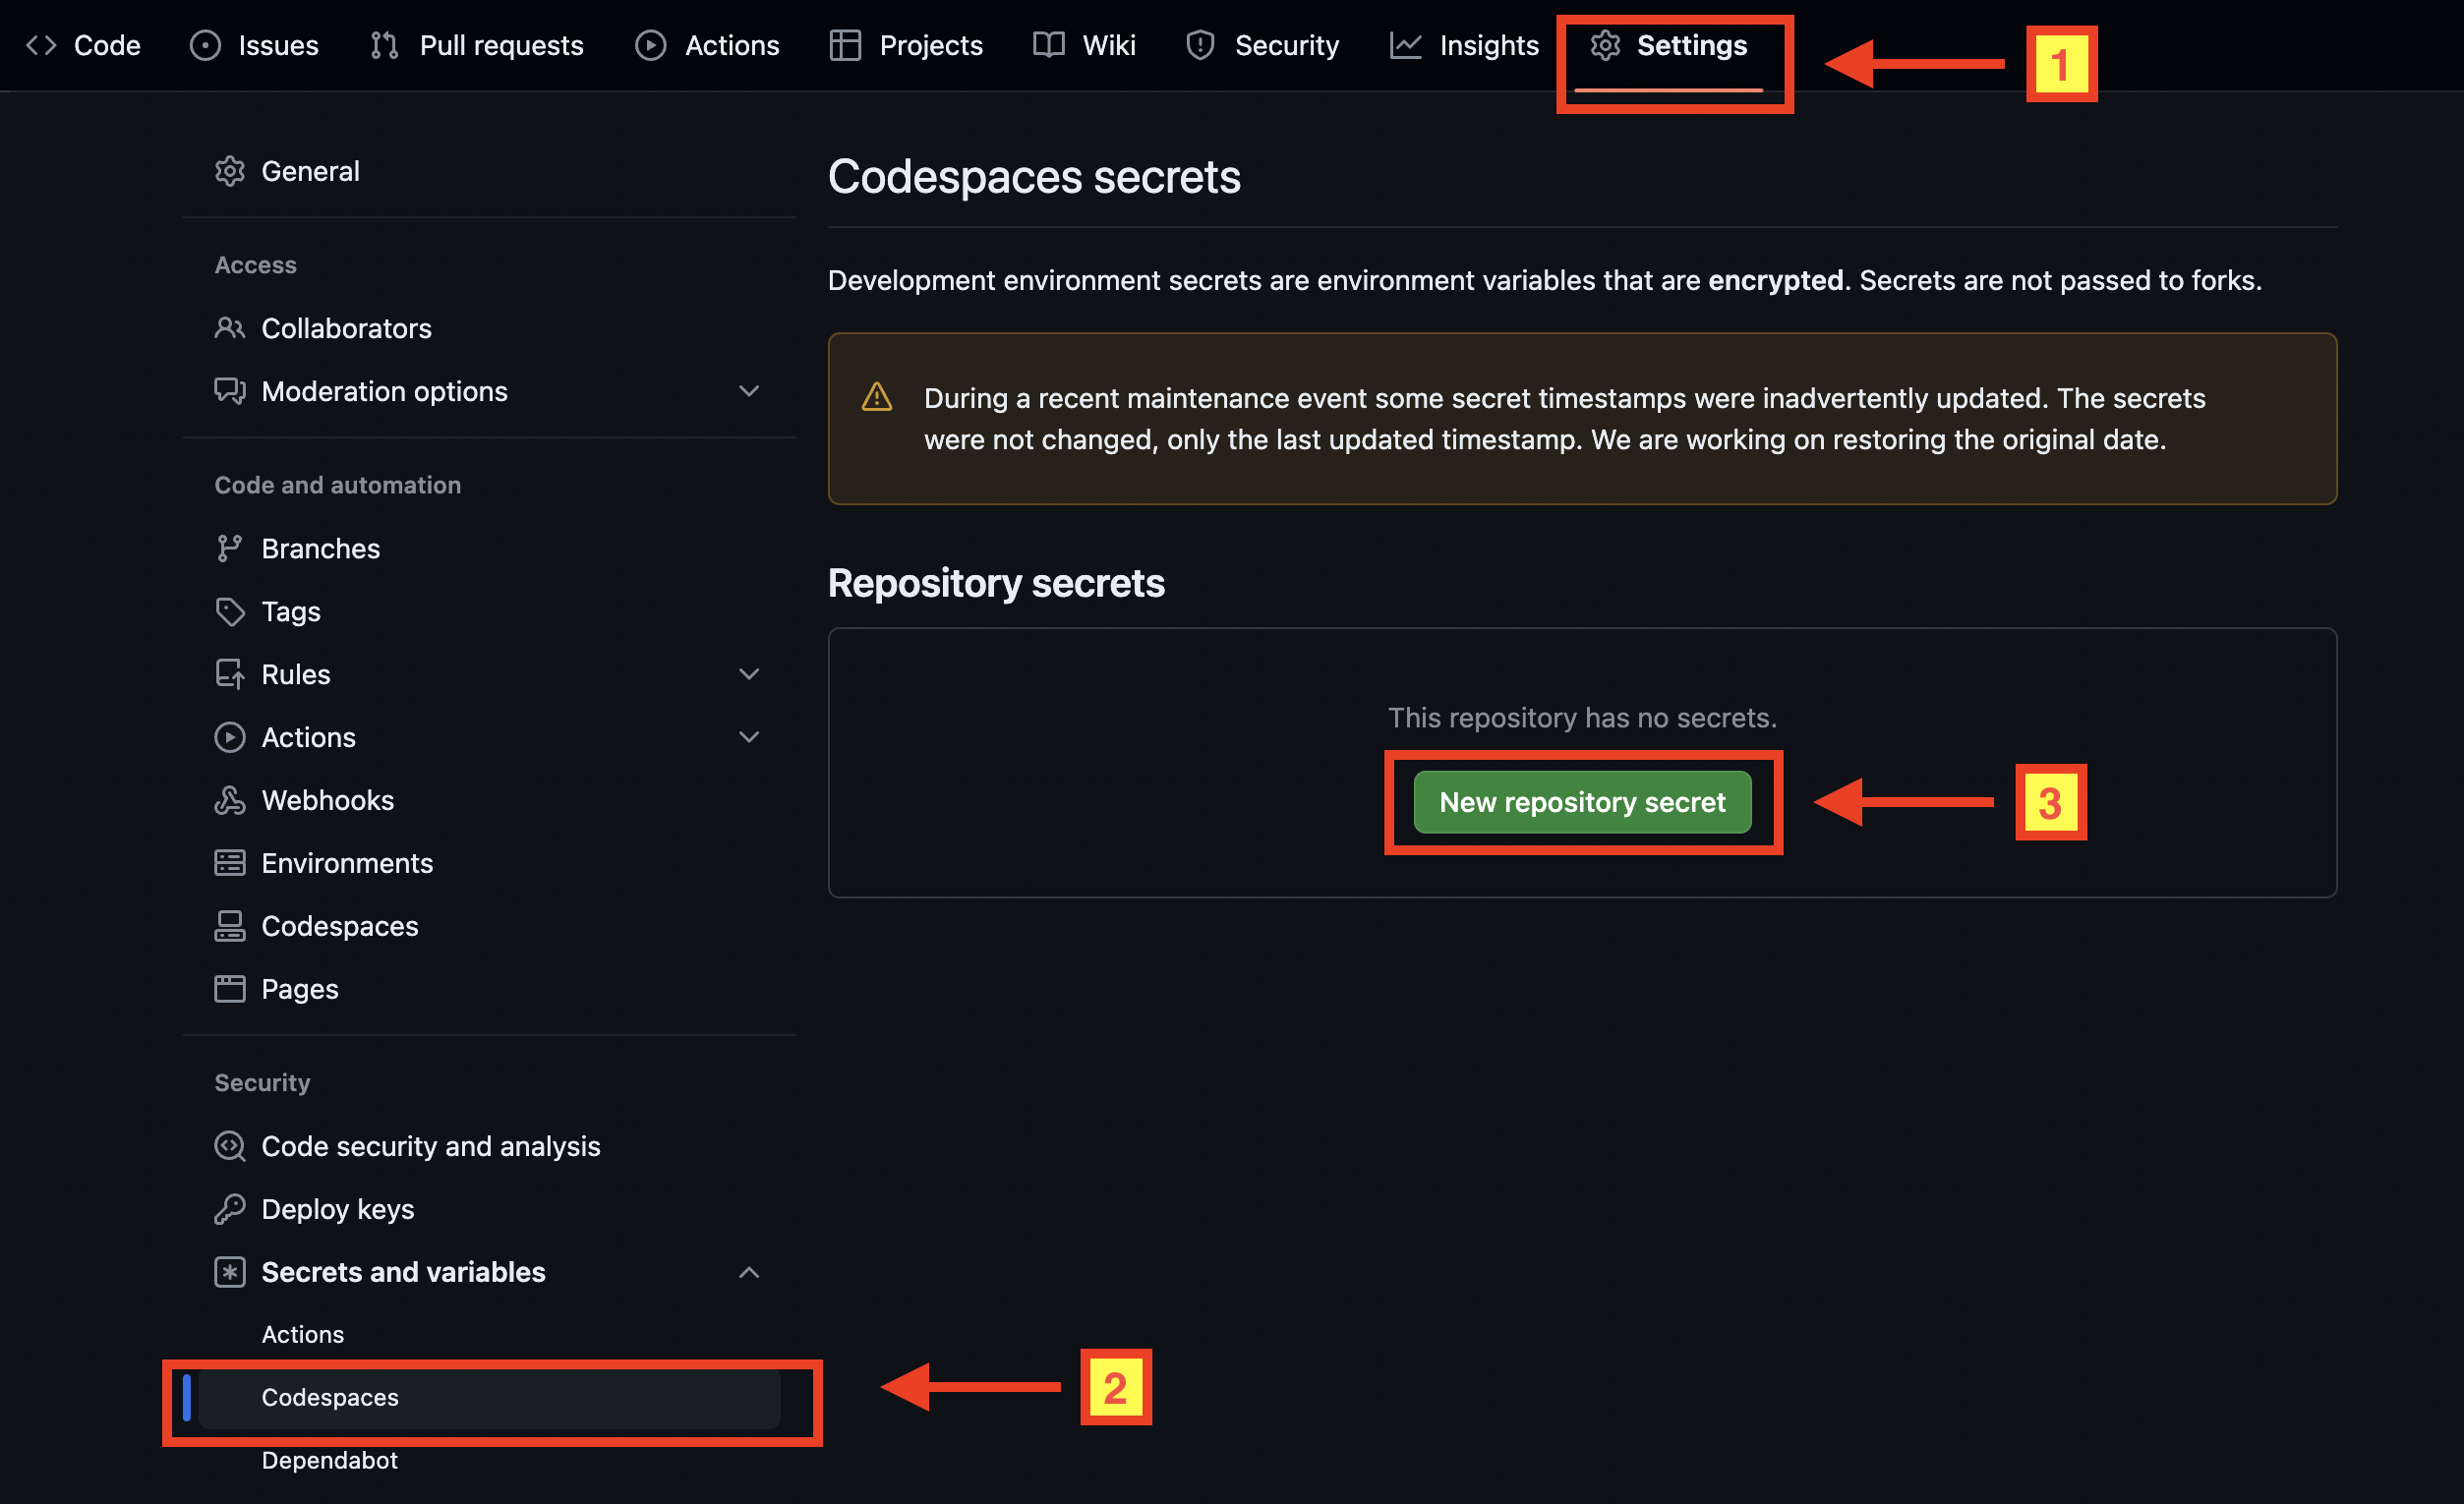 Show a GitHub web page to add repository secrets.